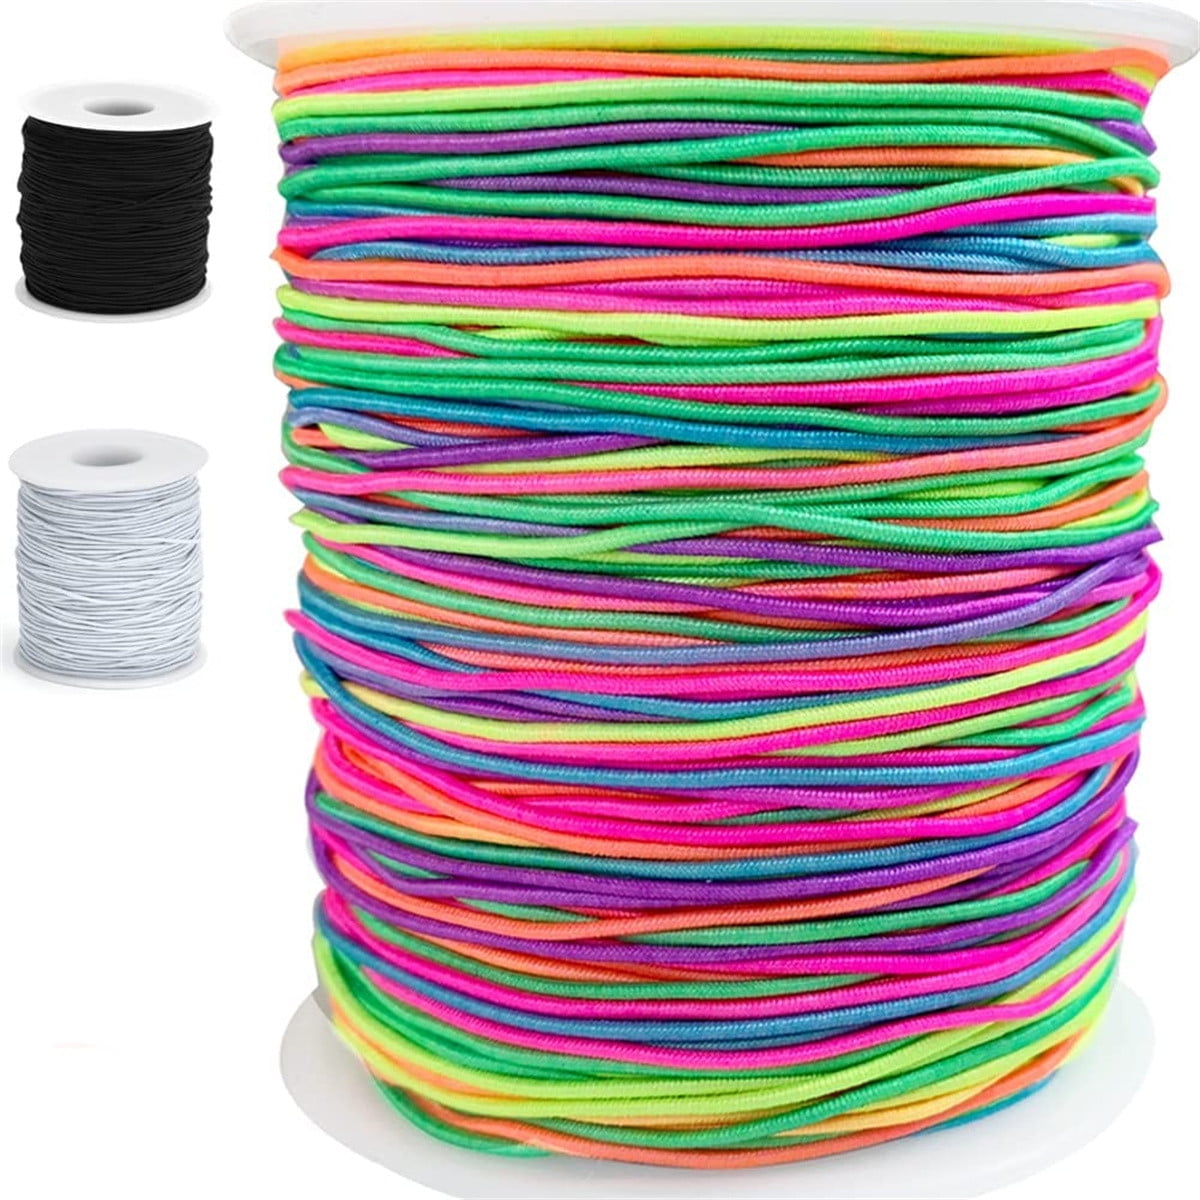 Multi-Color Craft Cord for Jewelry Making, 3-Pack